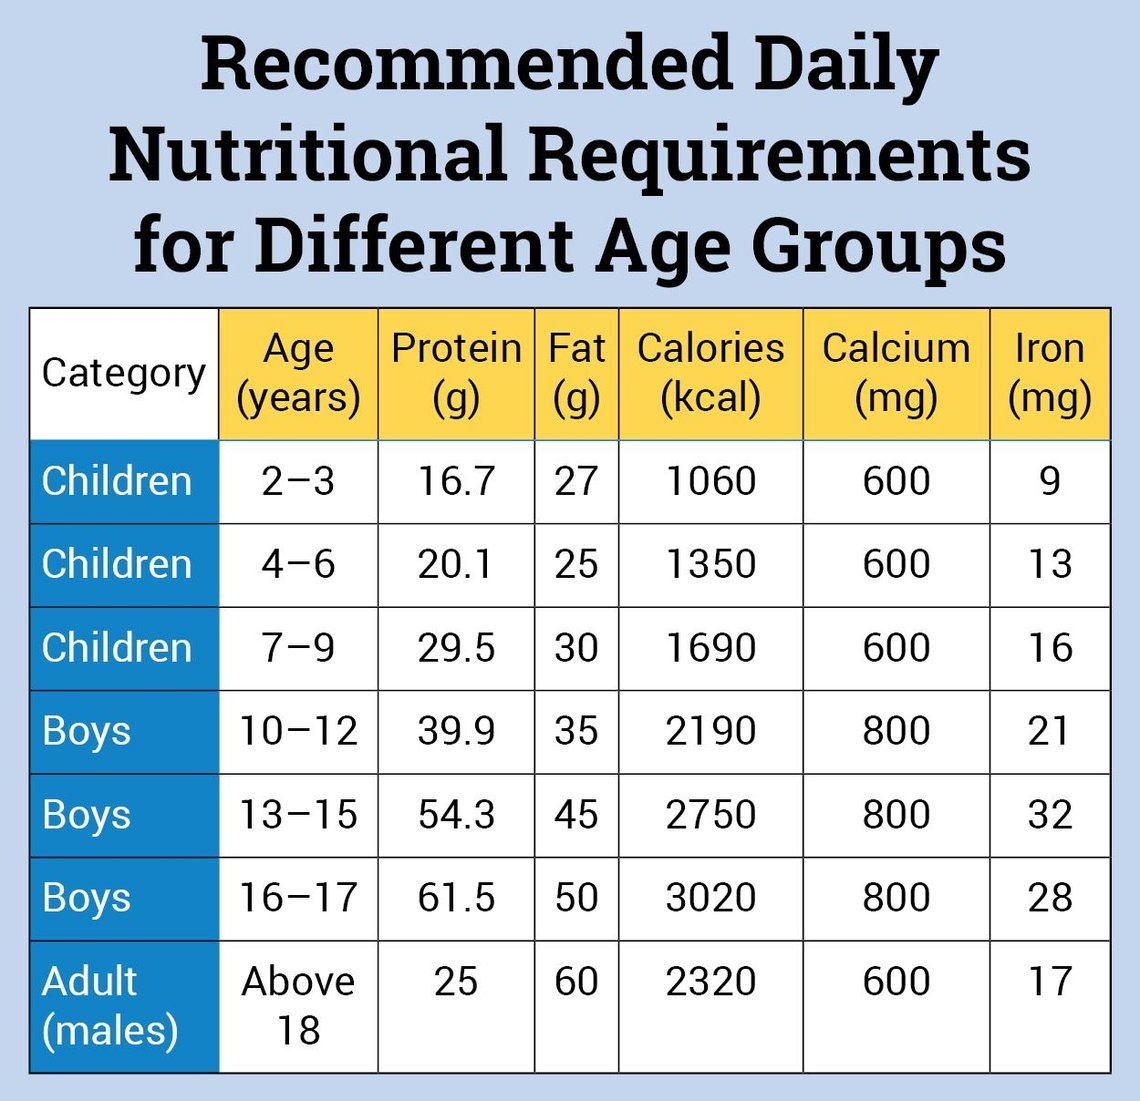 calorie-requirement-for-boys-of-different-age-groups-parentcircle